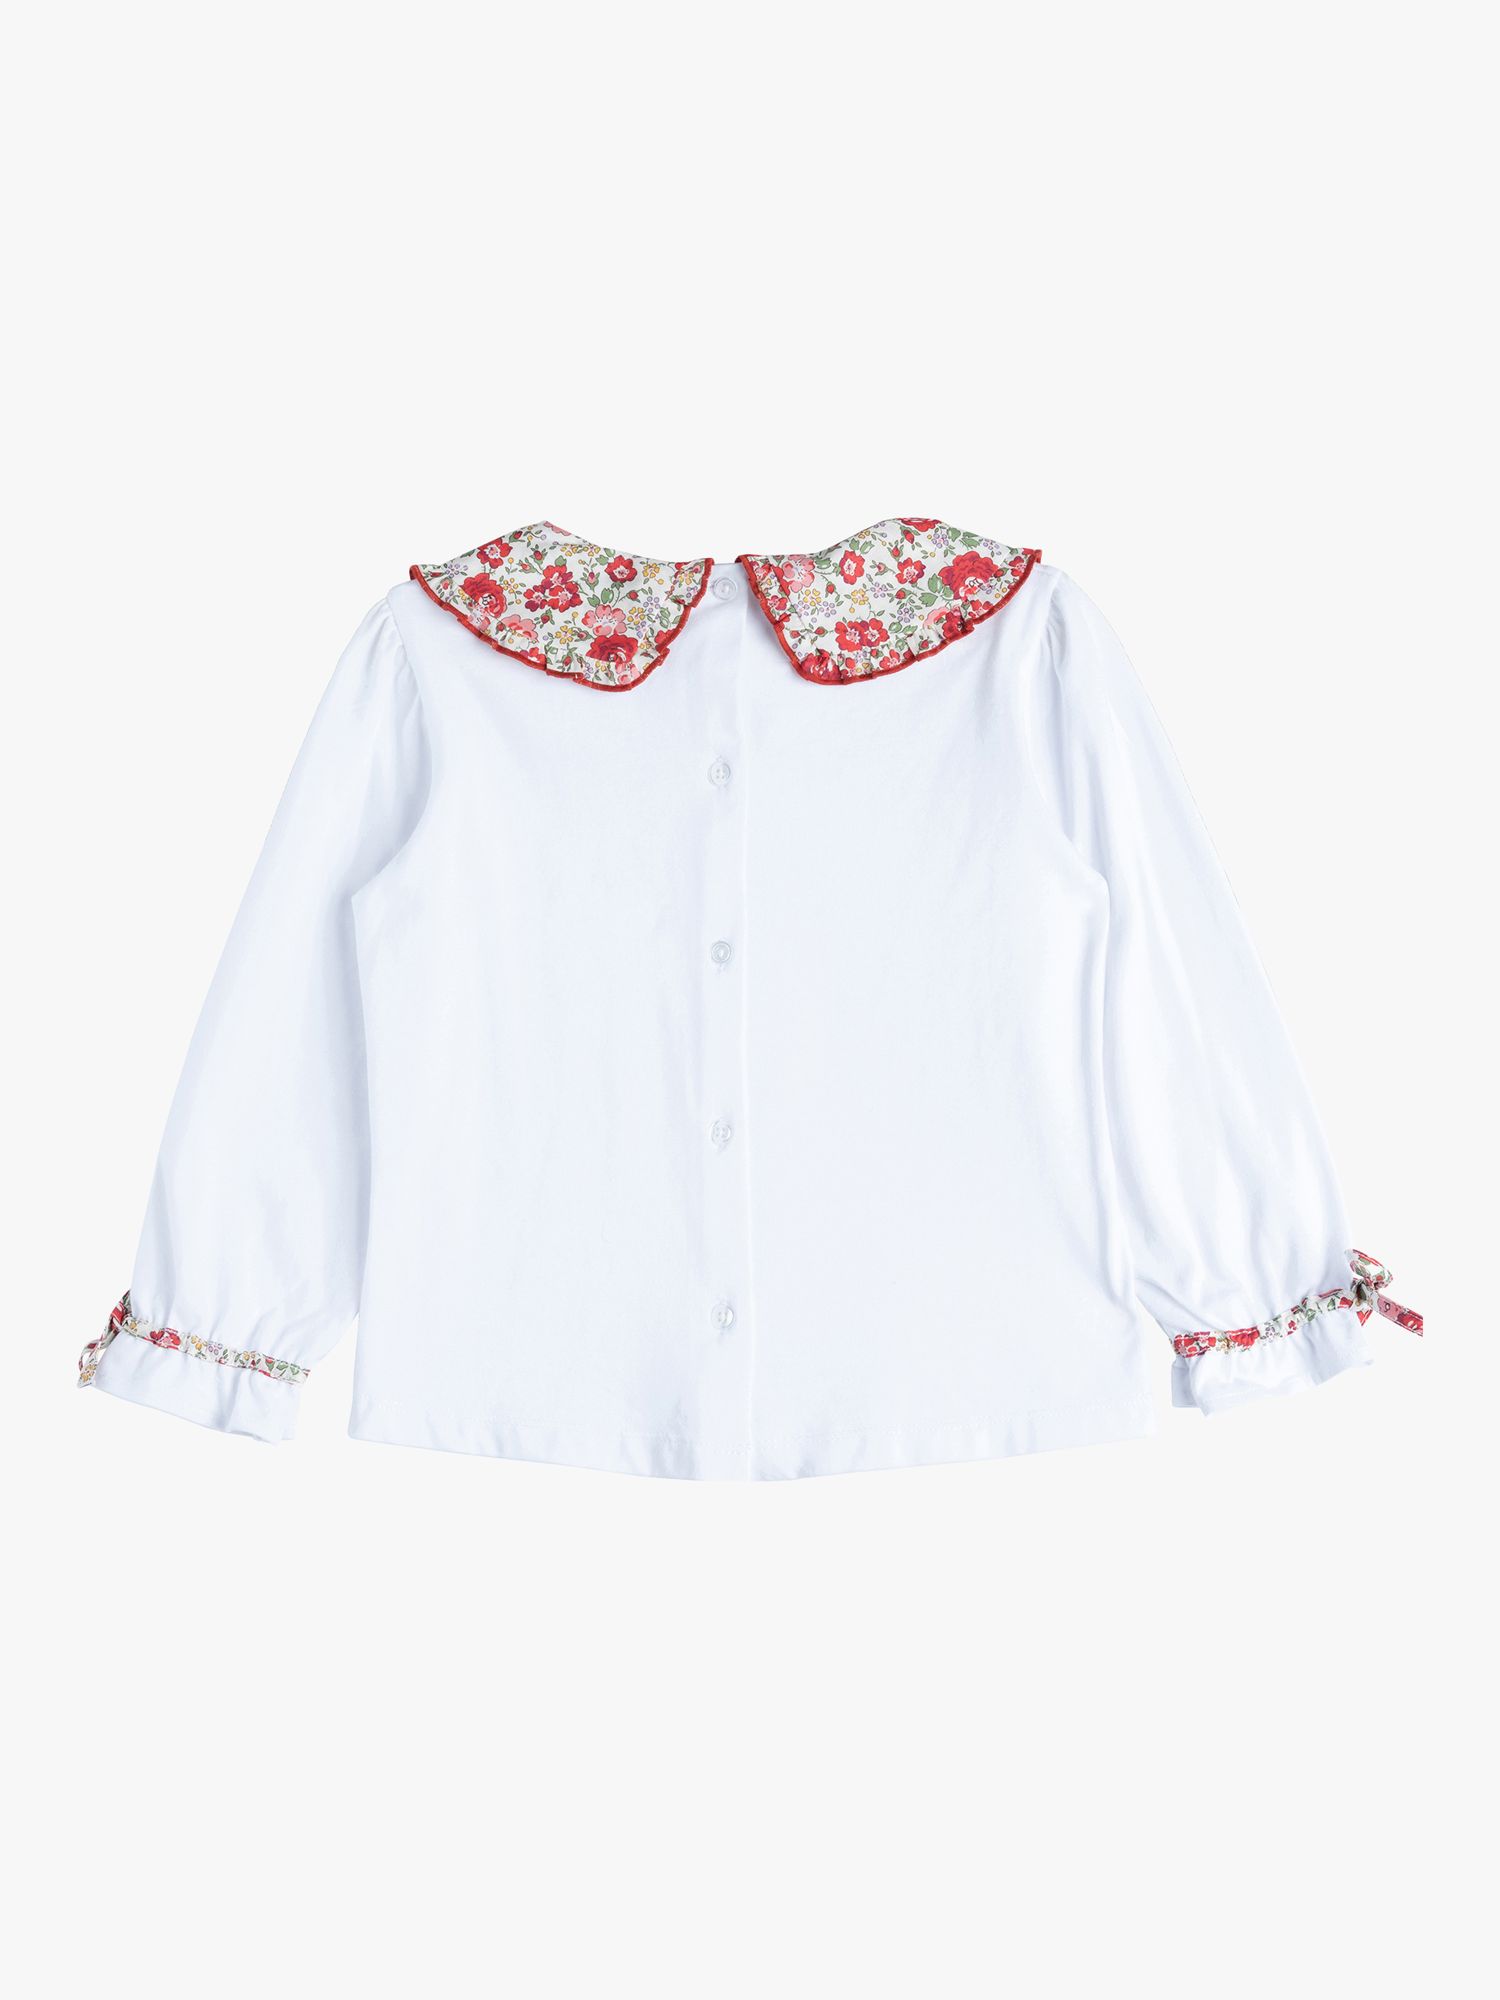 Buy Trotters Kids' Felicite Print Pie Crust Collar Jersey Blouse, White/Red Online at johnlewis.com